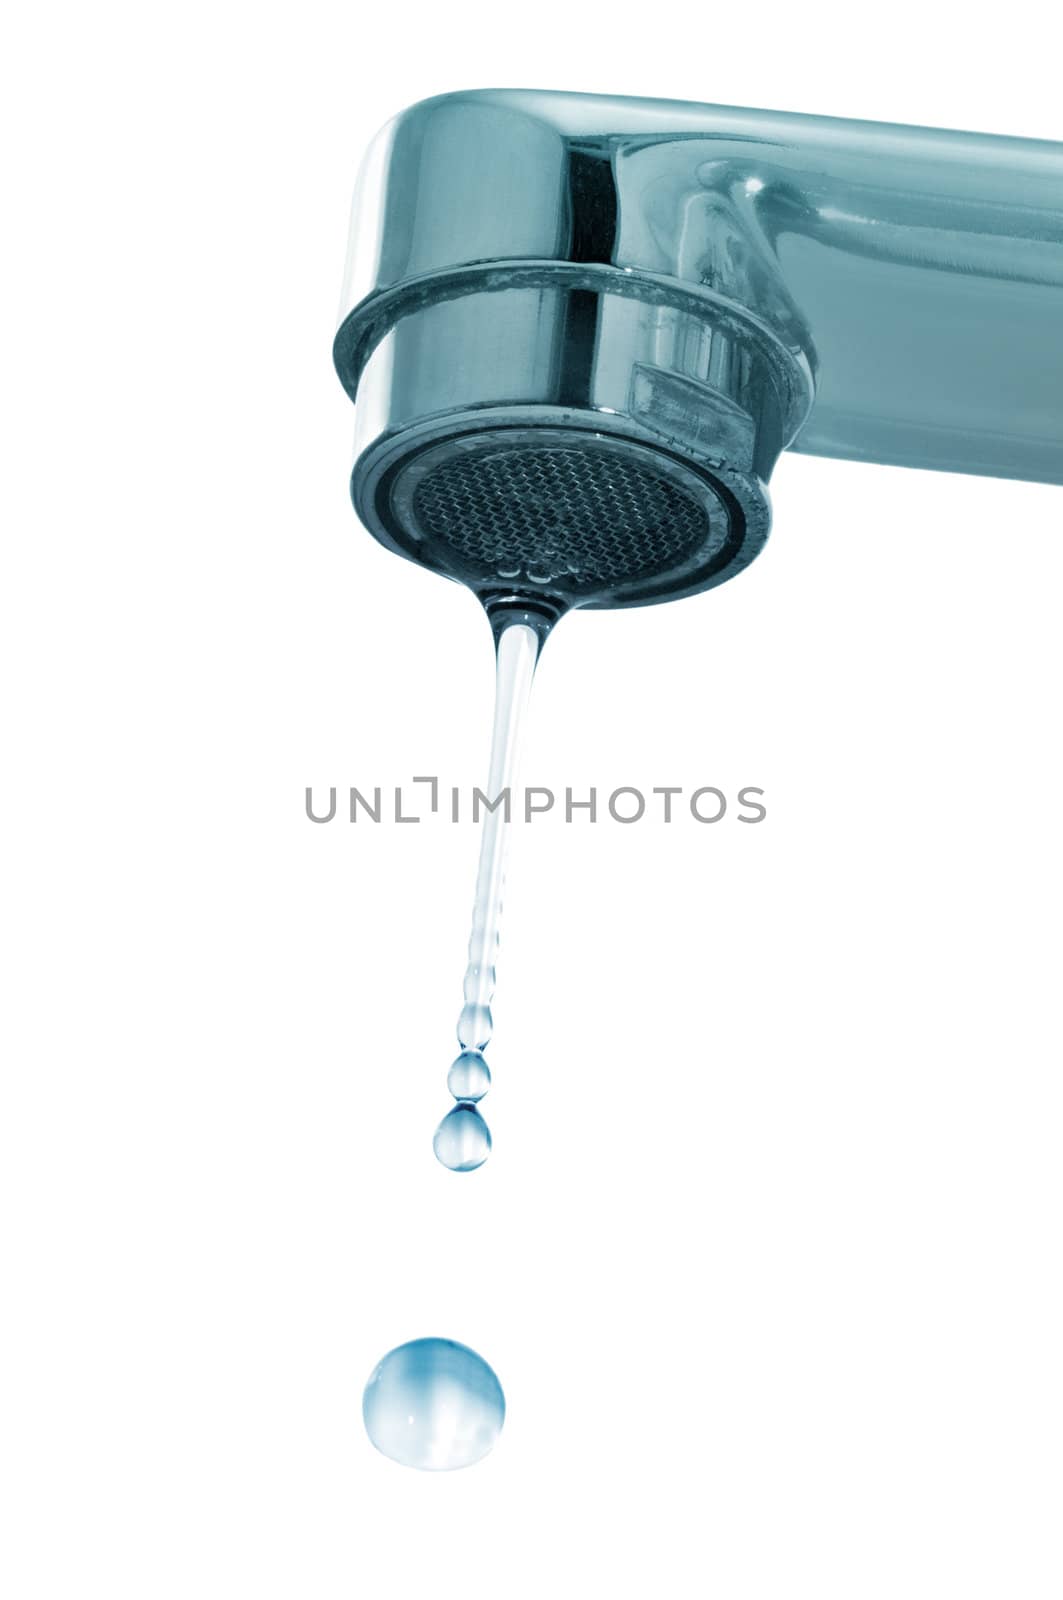 drops and faucet by Serg64